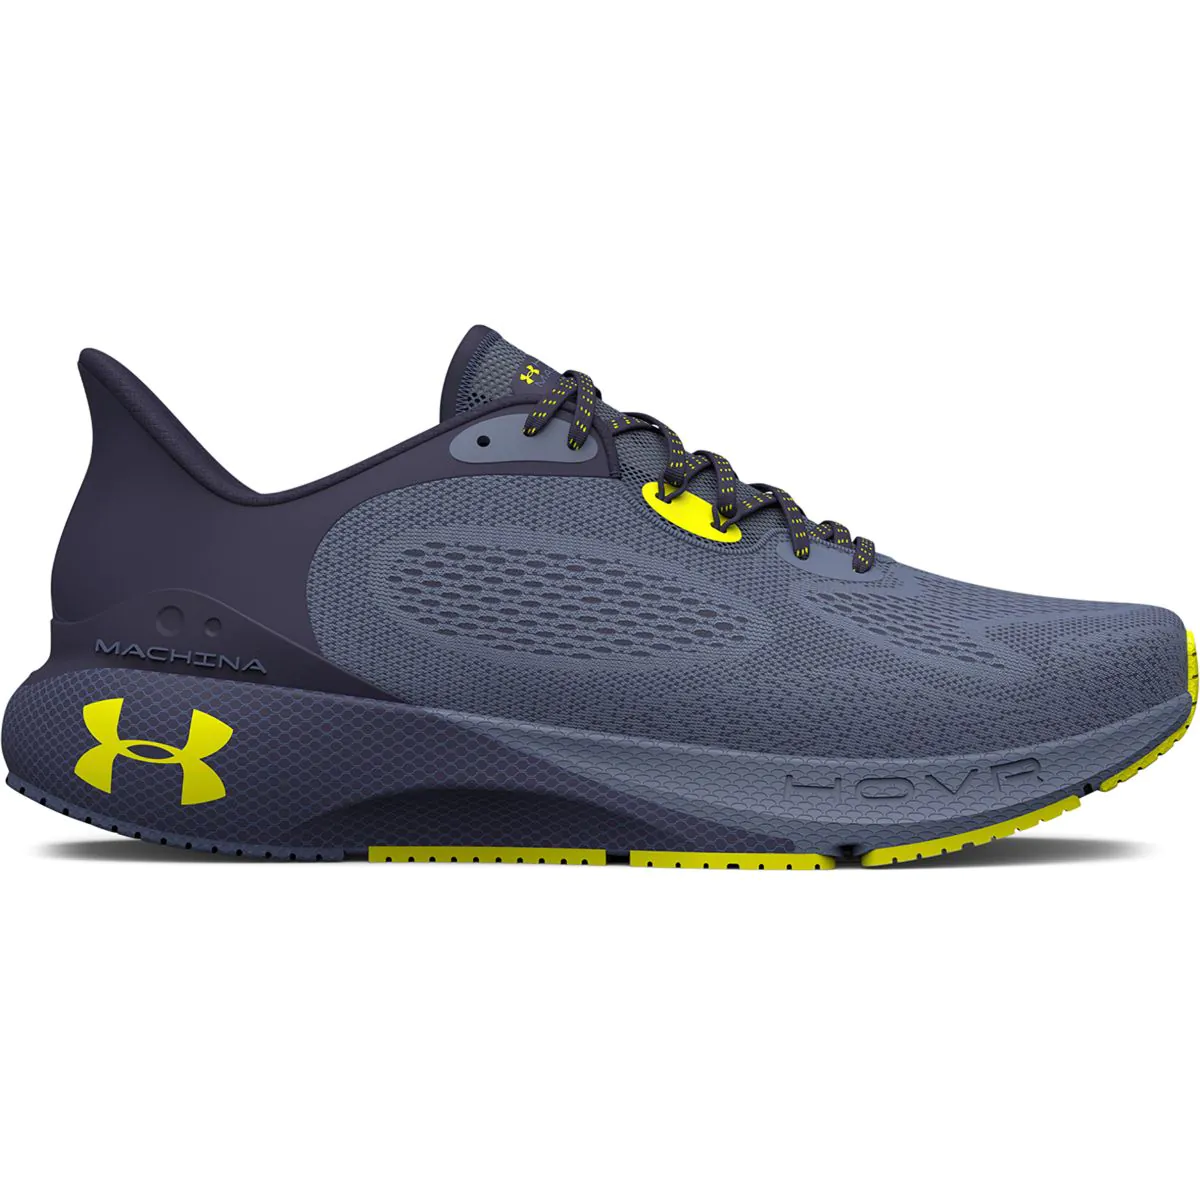 Under Armour HOVR Machina 3 Men's Running Shoes 3024899-500